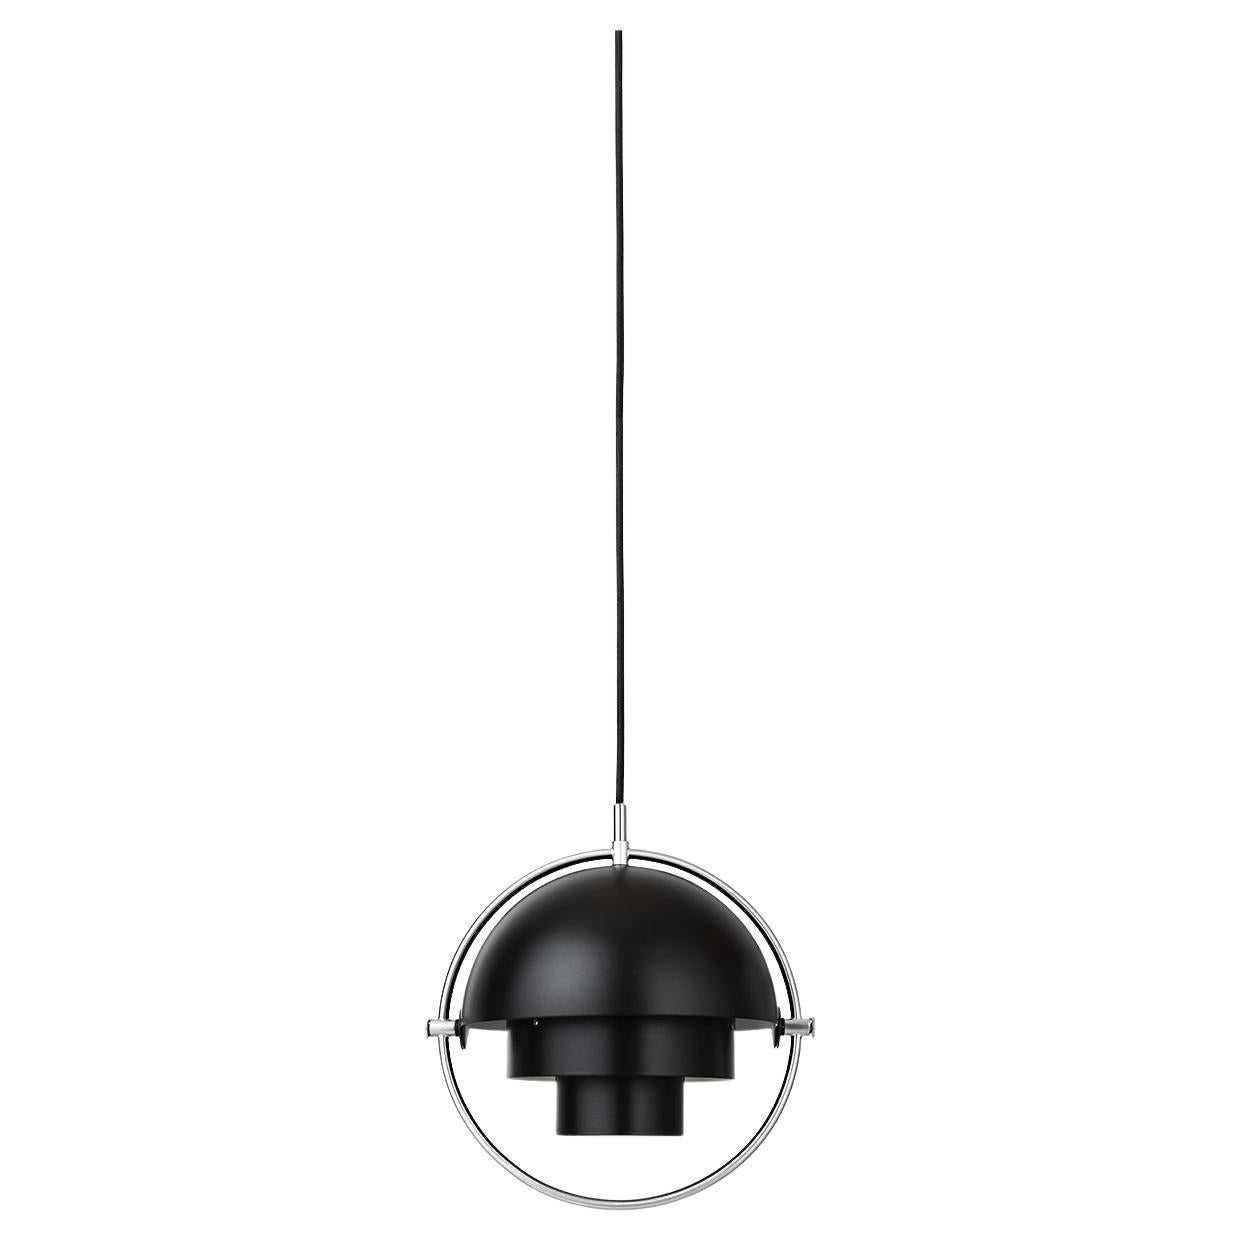 The Multi-Lite Pendant embraces the golden era of Danish design with its characteristic shape of two opposing outside, mobile shades that enable creating a personal installation and a wide range of lighting values in a room.

The Multi-Lite